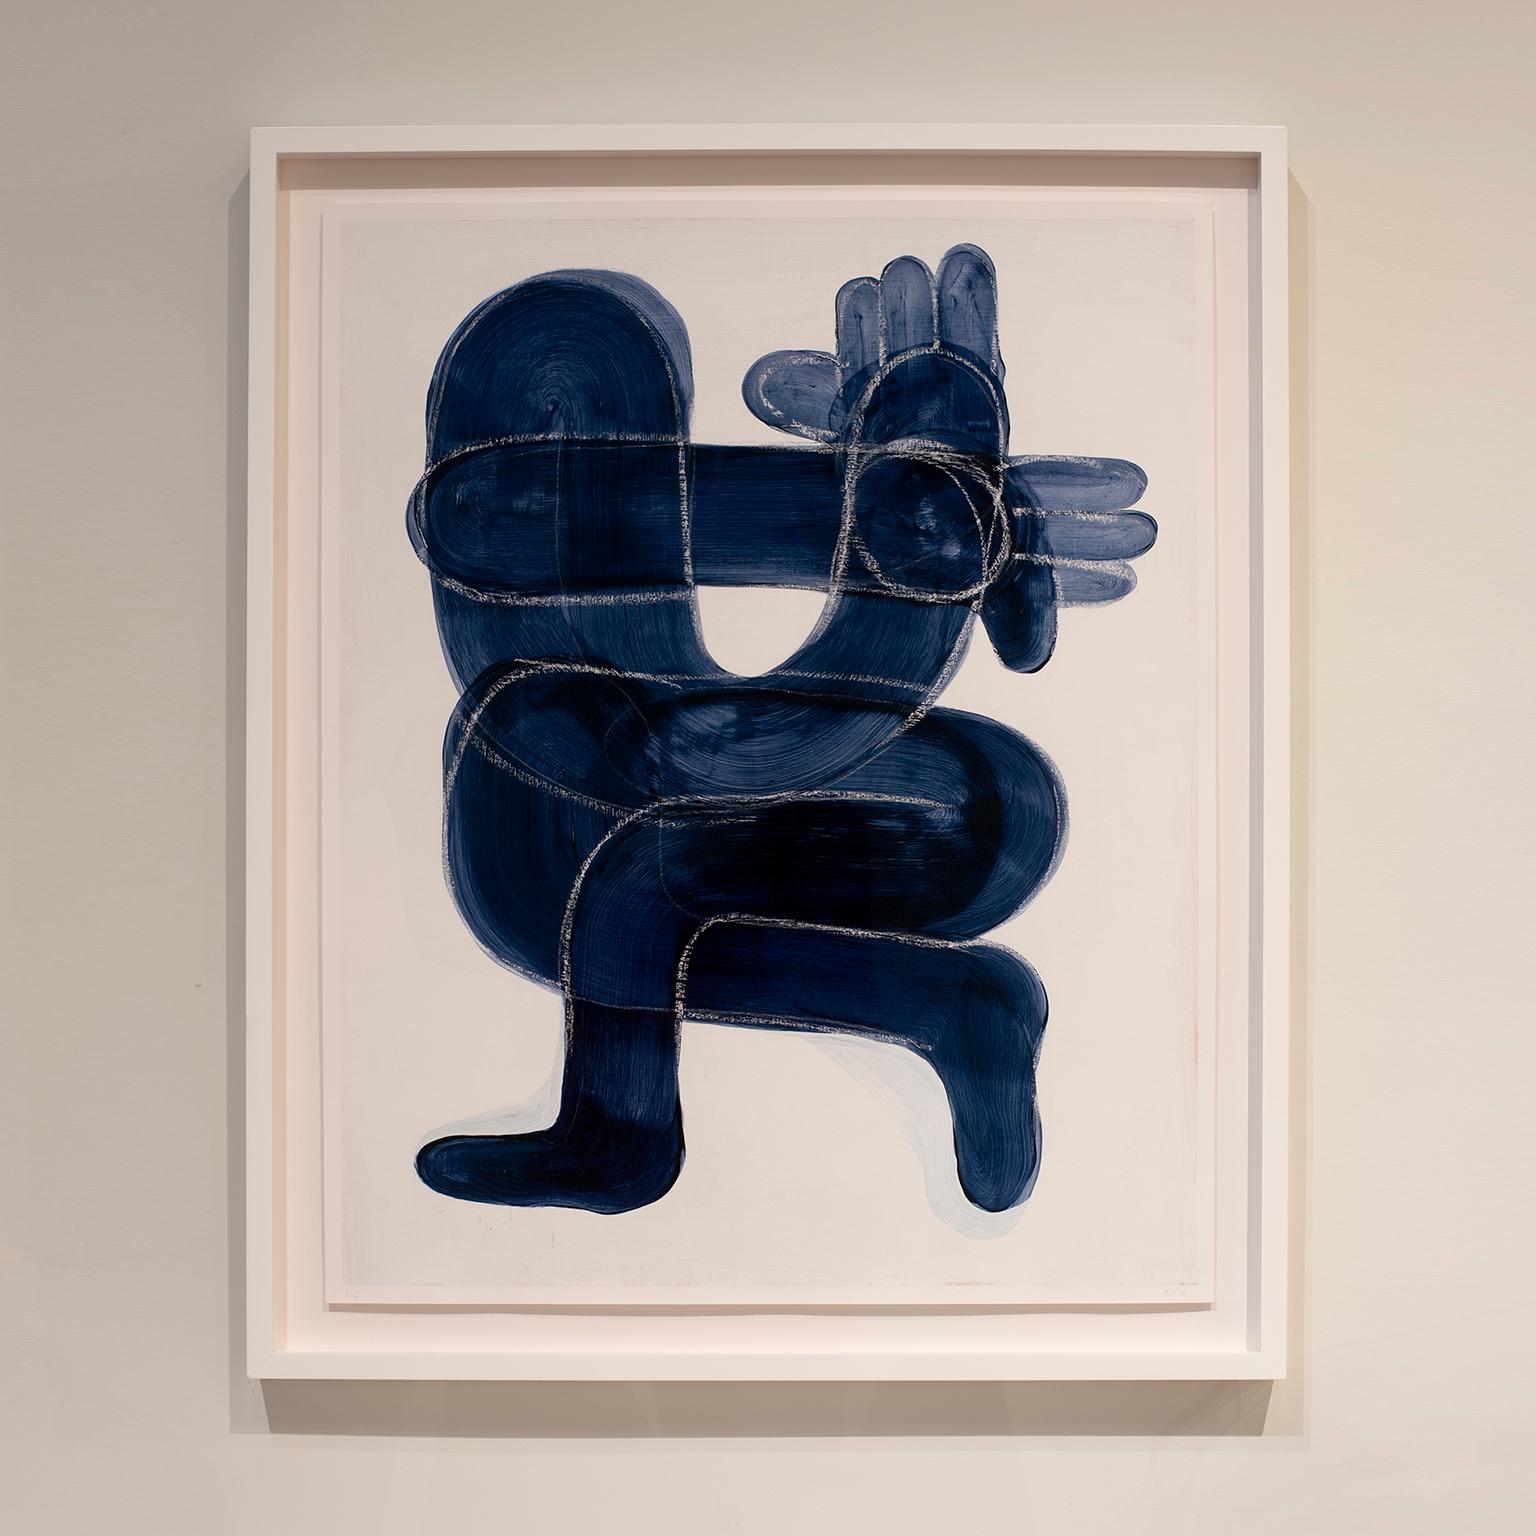 The feeling you get when you can't put your finger on something. Blue figurative - Print by Kyle Andrew Steed